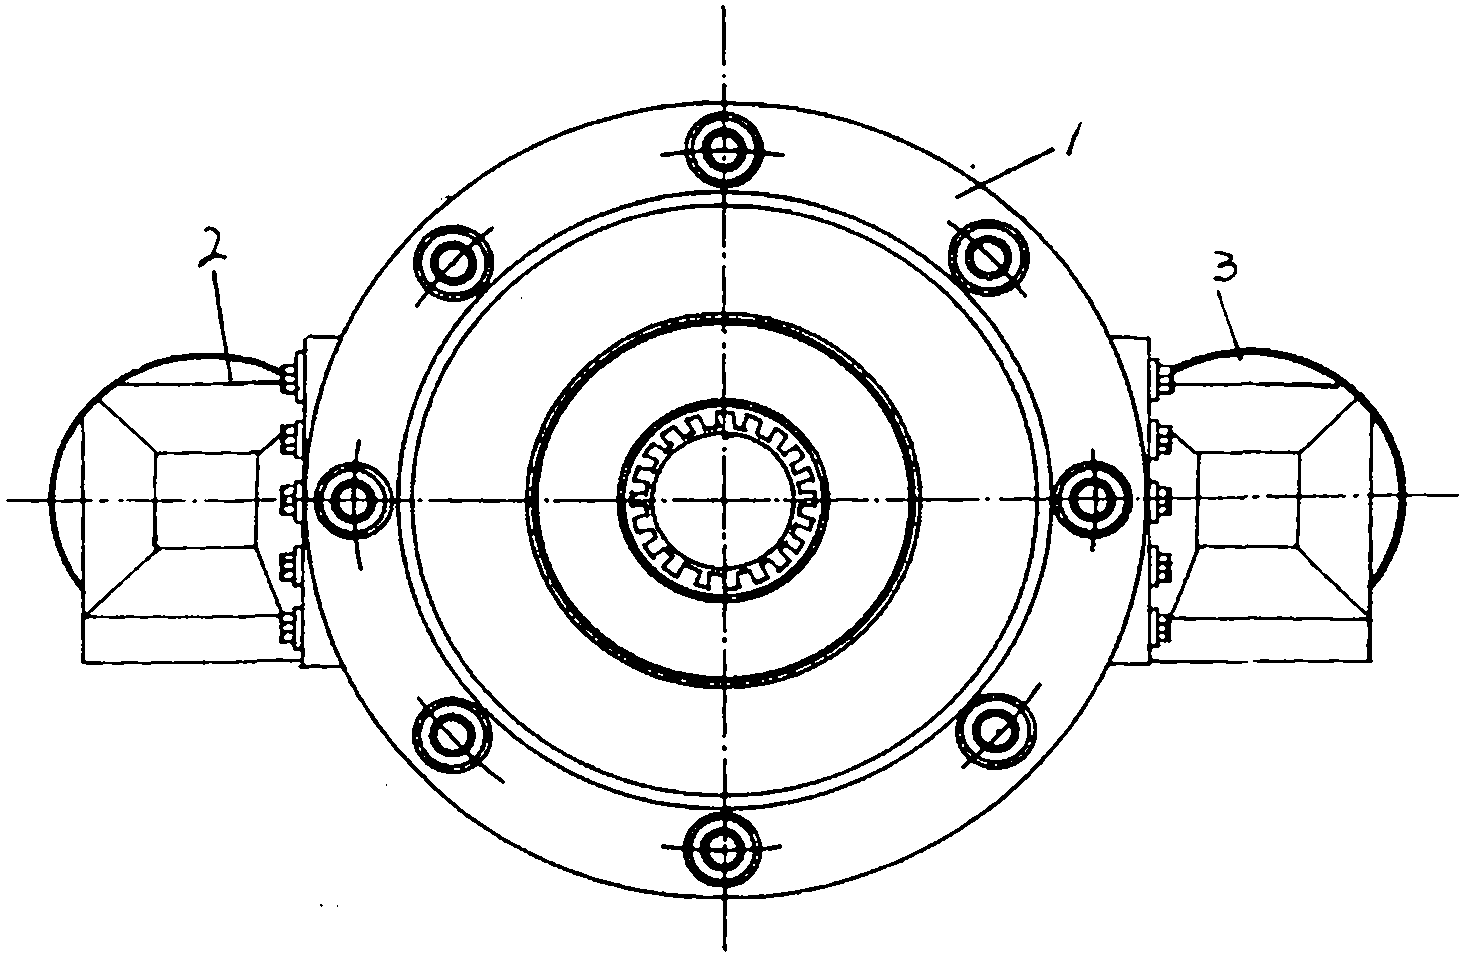 Inserter-connected electromagnetic drive clutch with spline shafts having discs and spline sleeves having discs